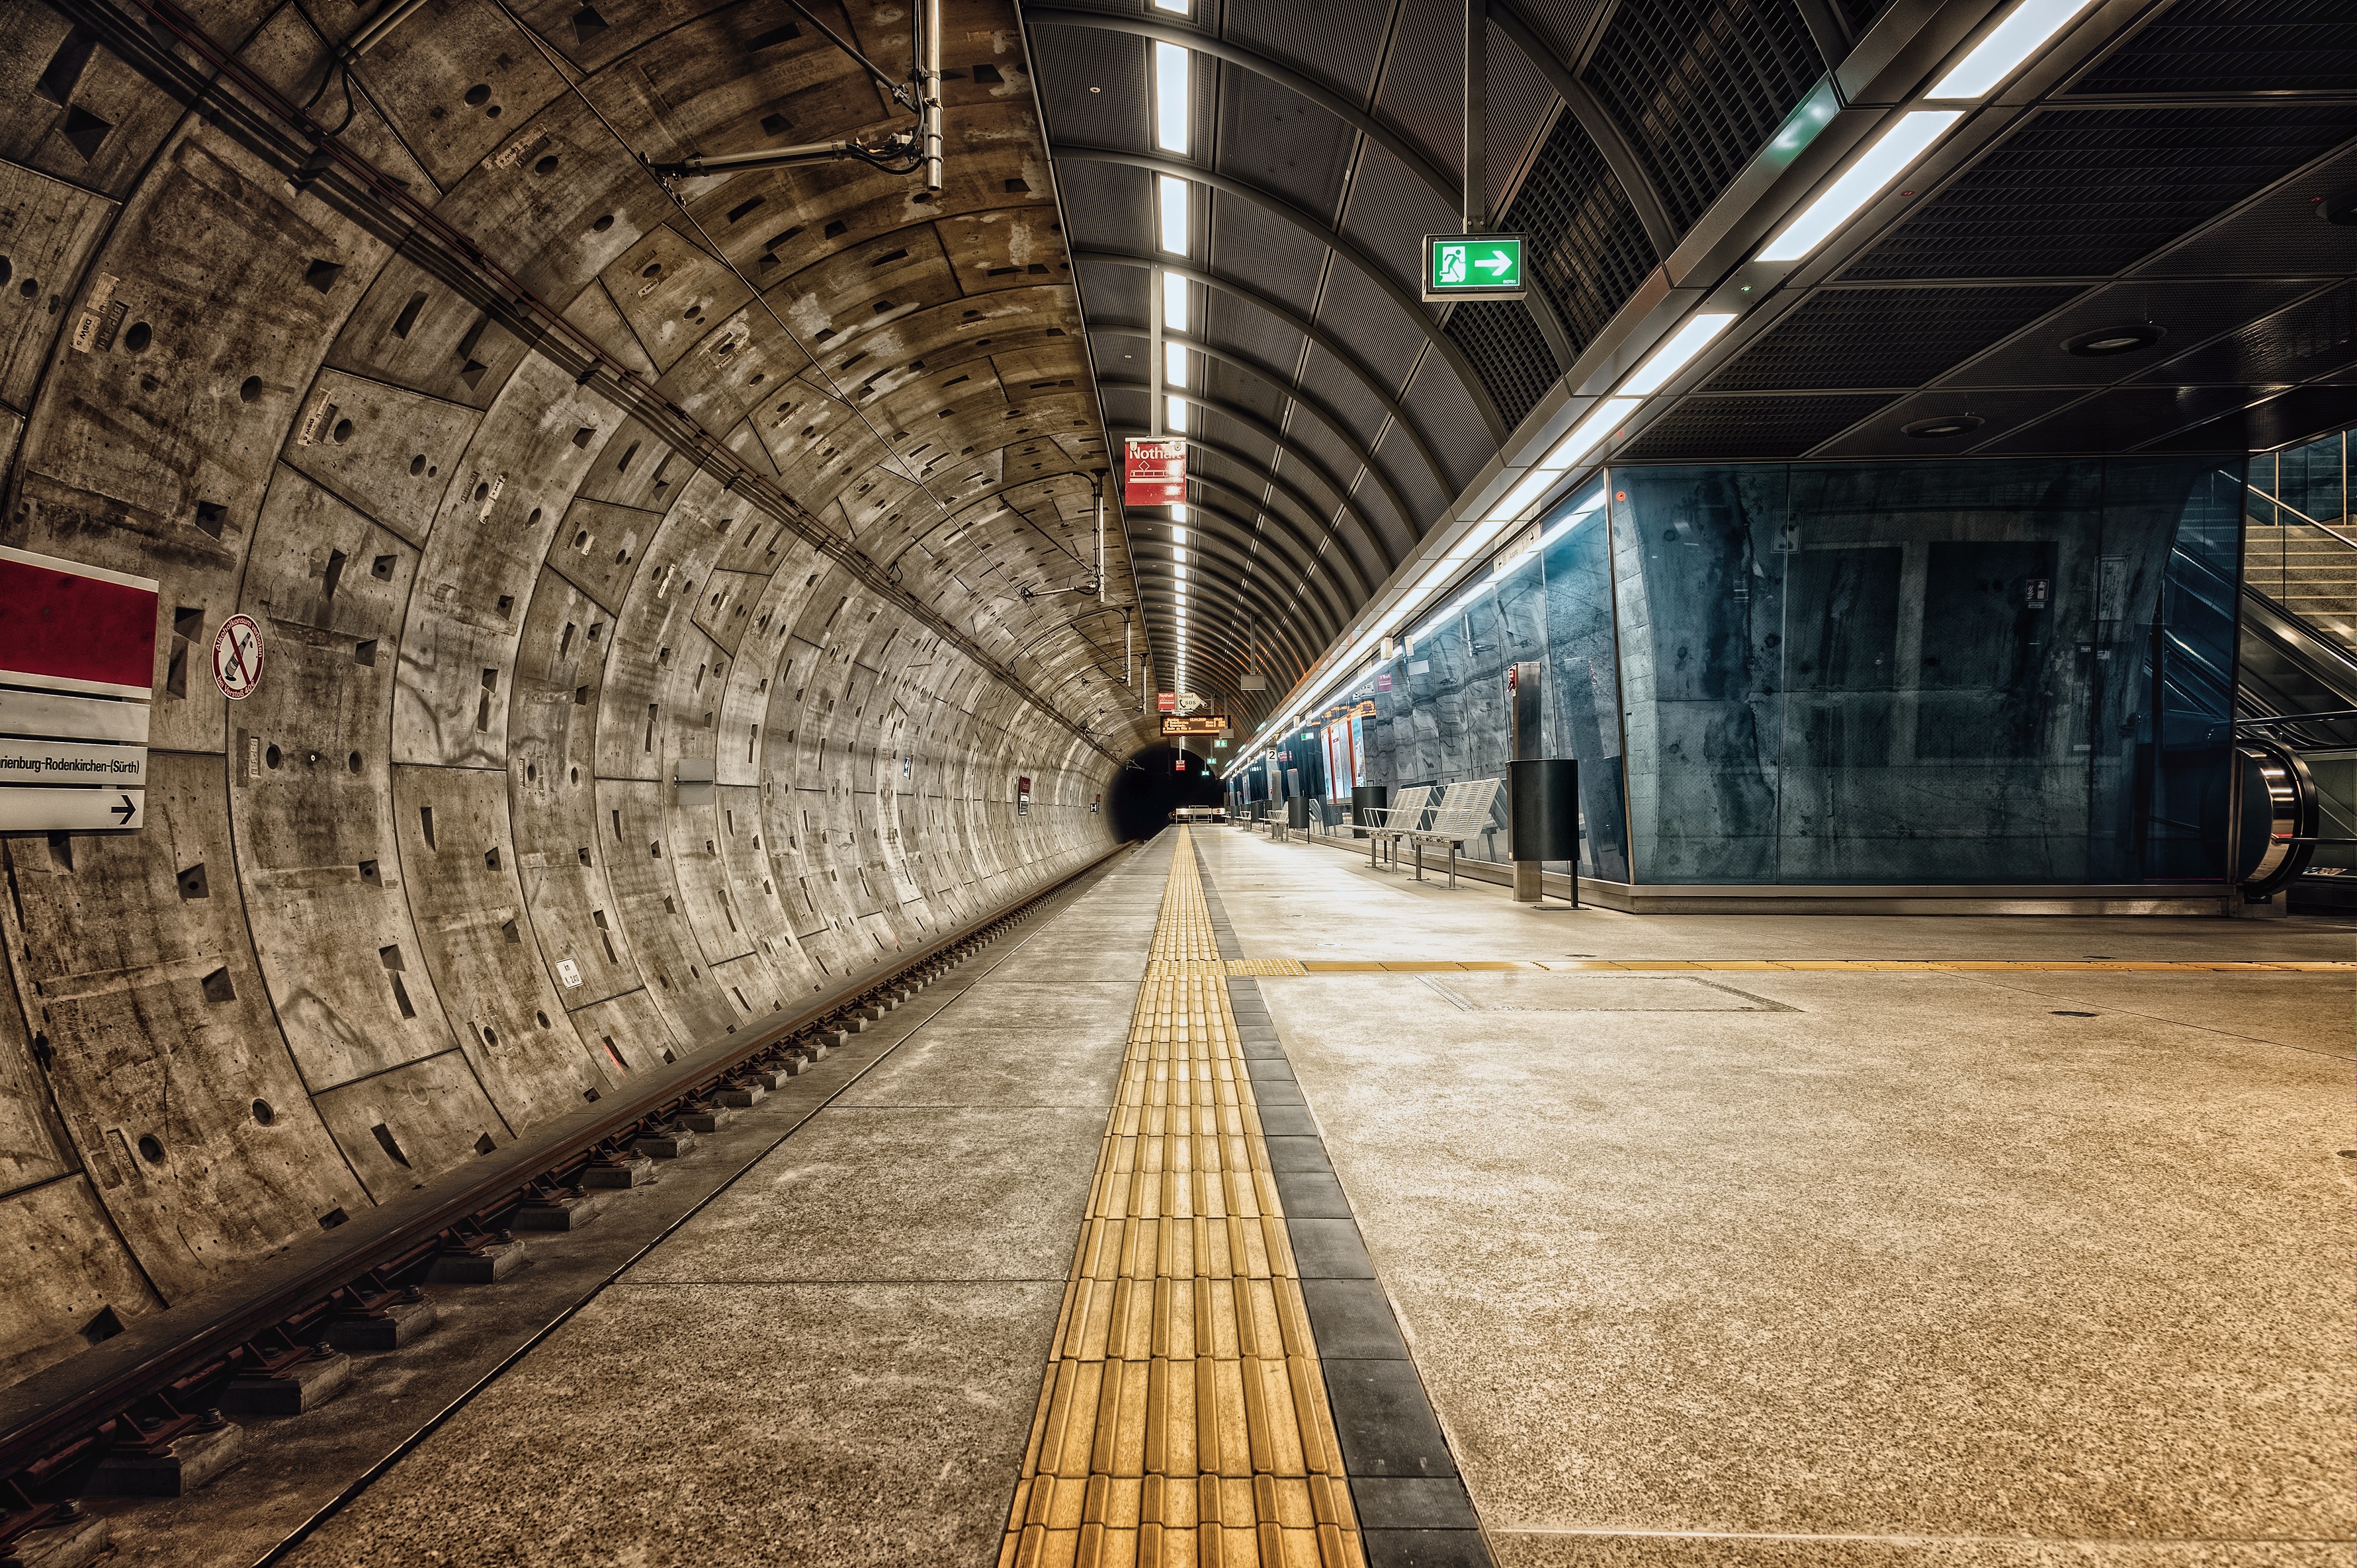 Underground Tunnel, Metro Railway Station, Cologne, Germany by Tama66